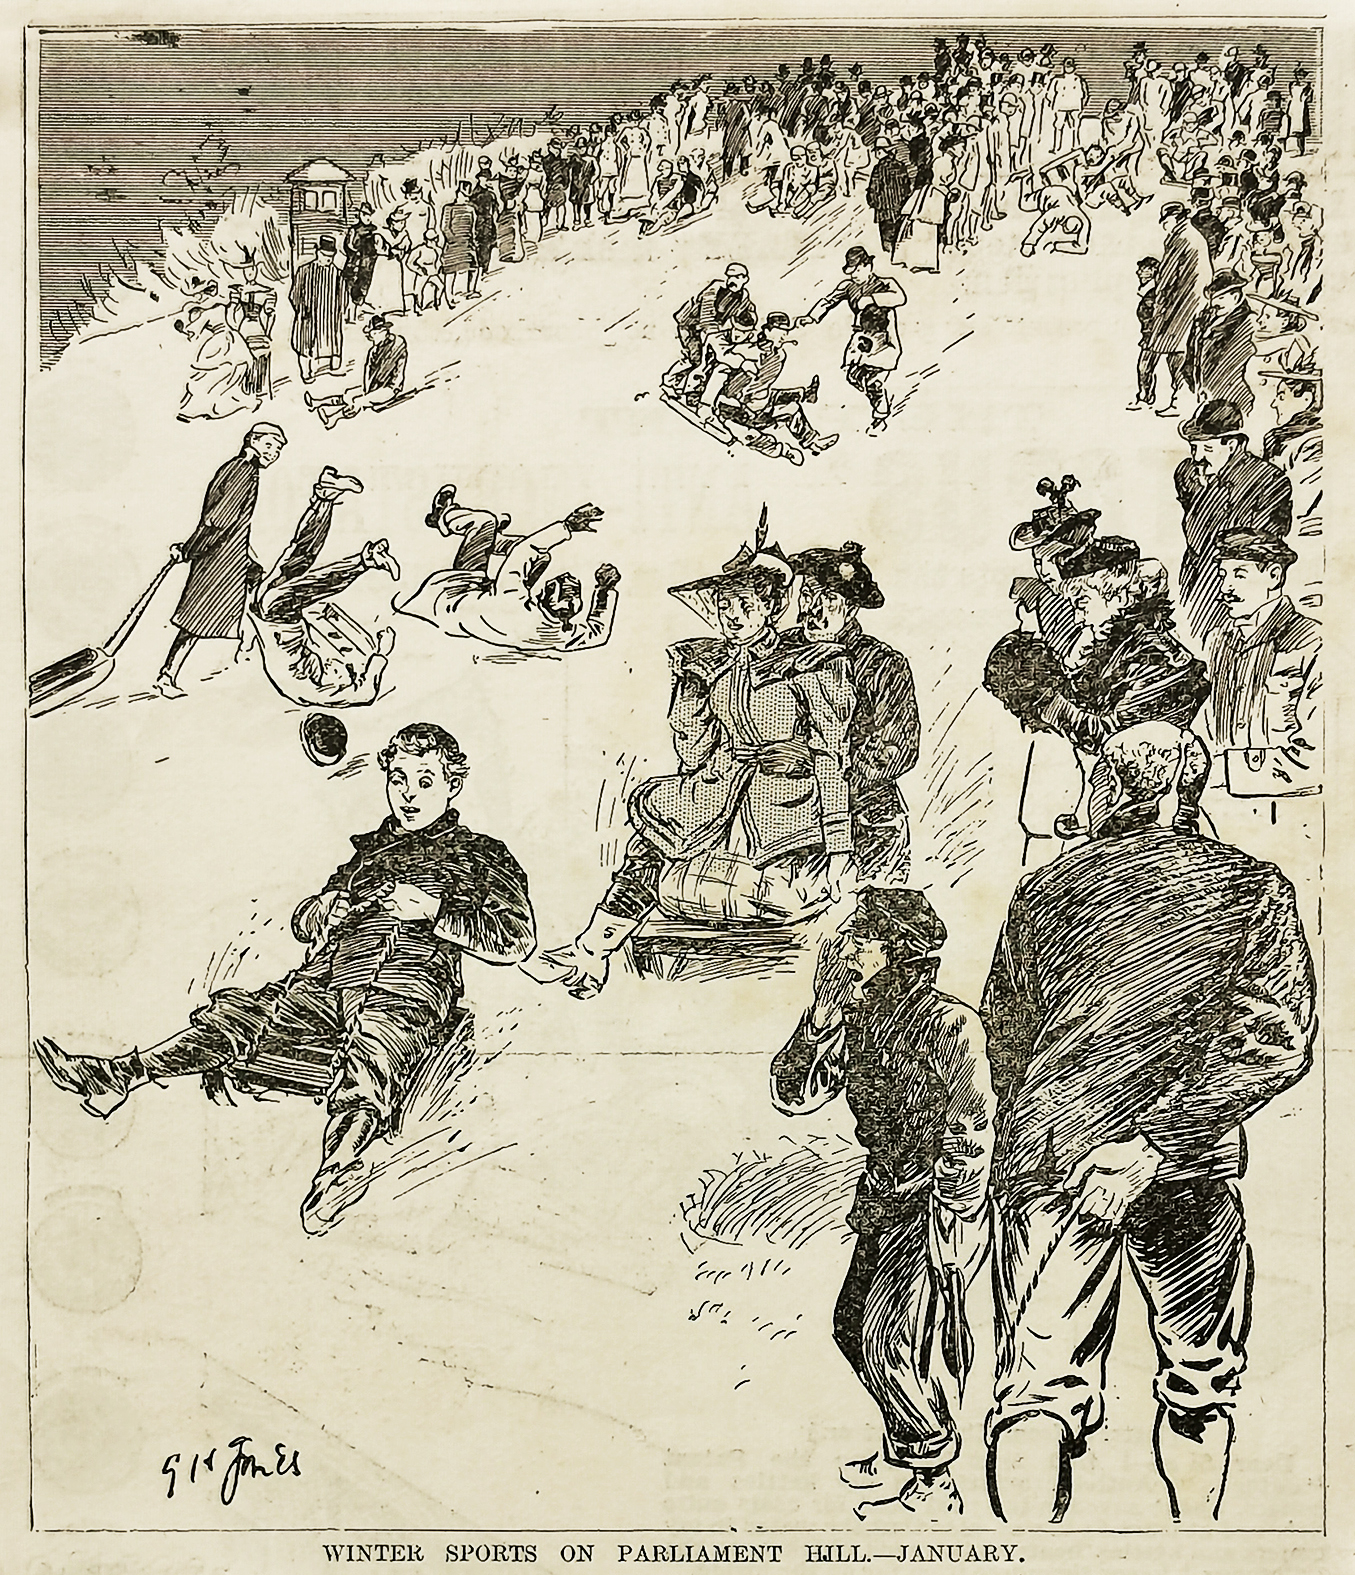 Winter sports on Parliament Hill - January. - Antique Print from 1894